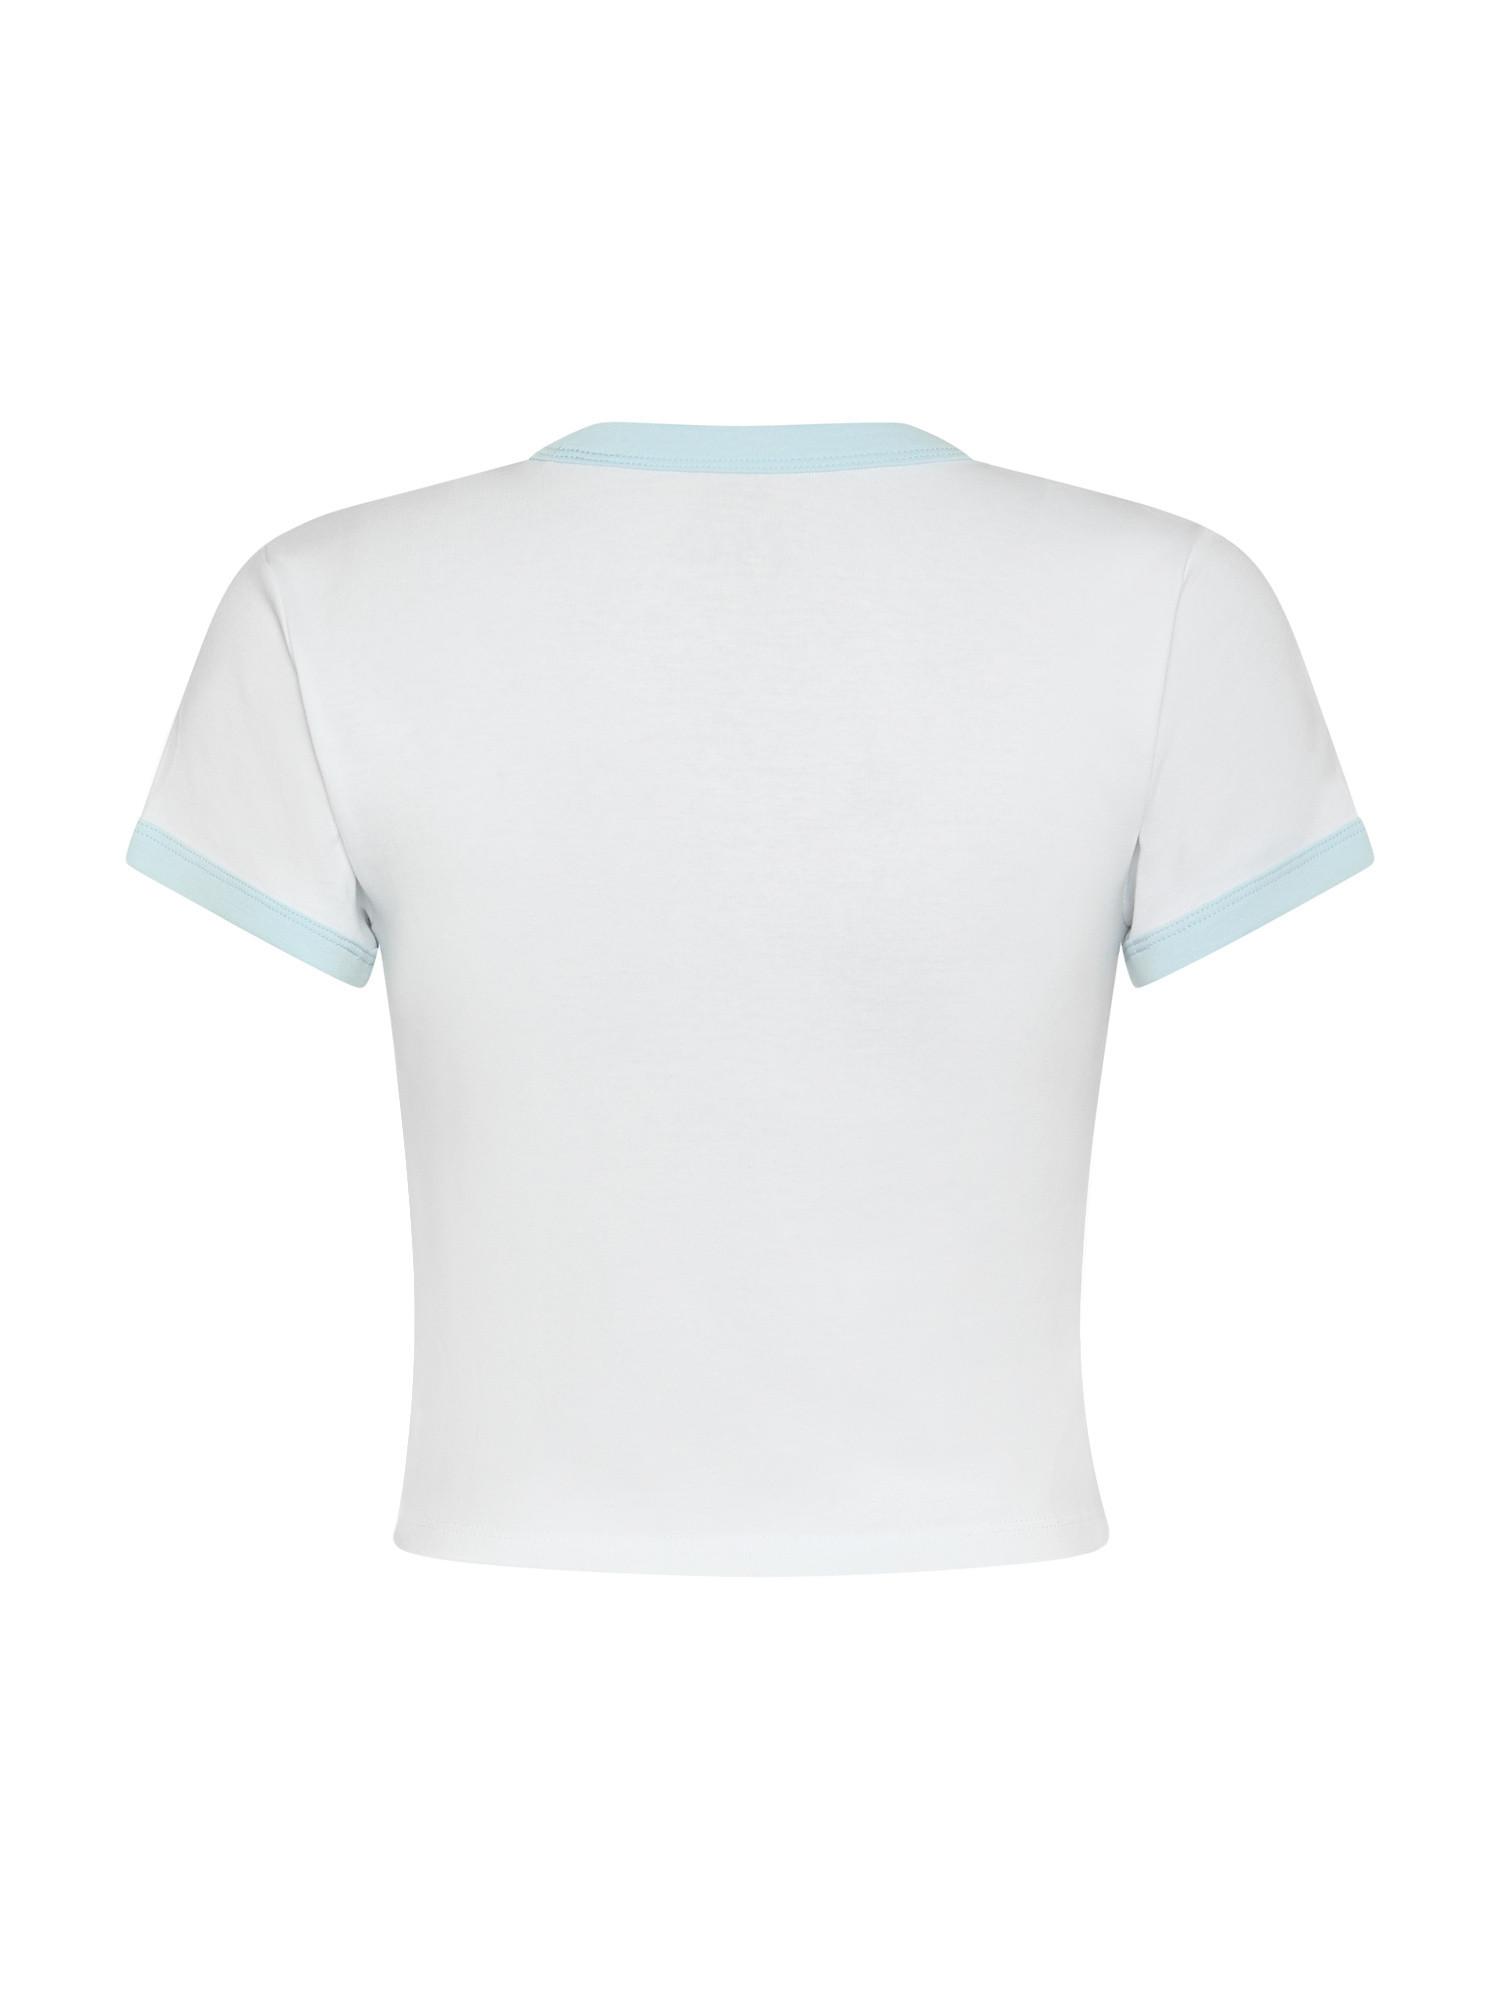 Levi's - T-shirt crop in cotone slim fit con logo, Bianco, large image number 1